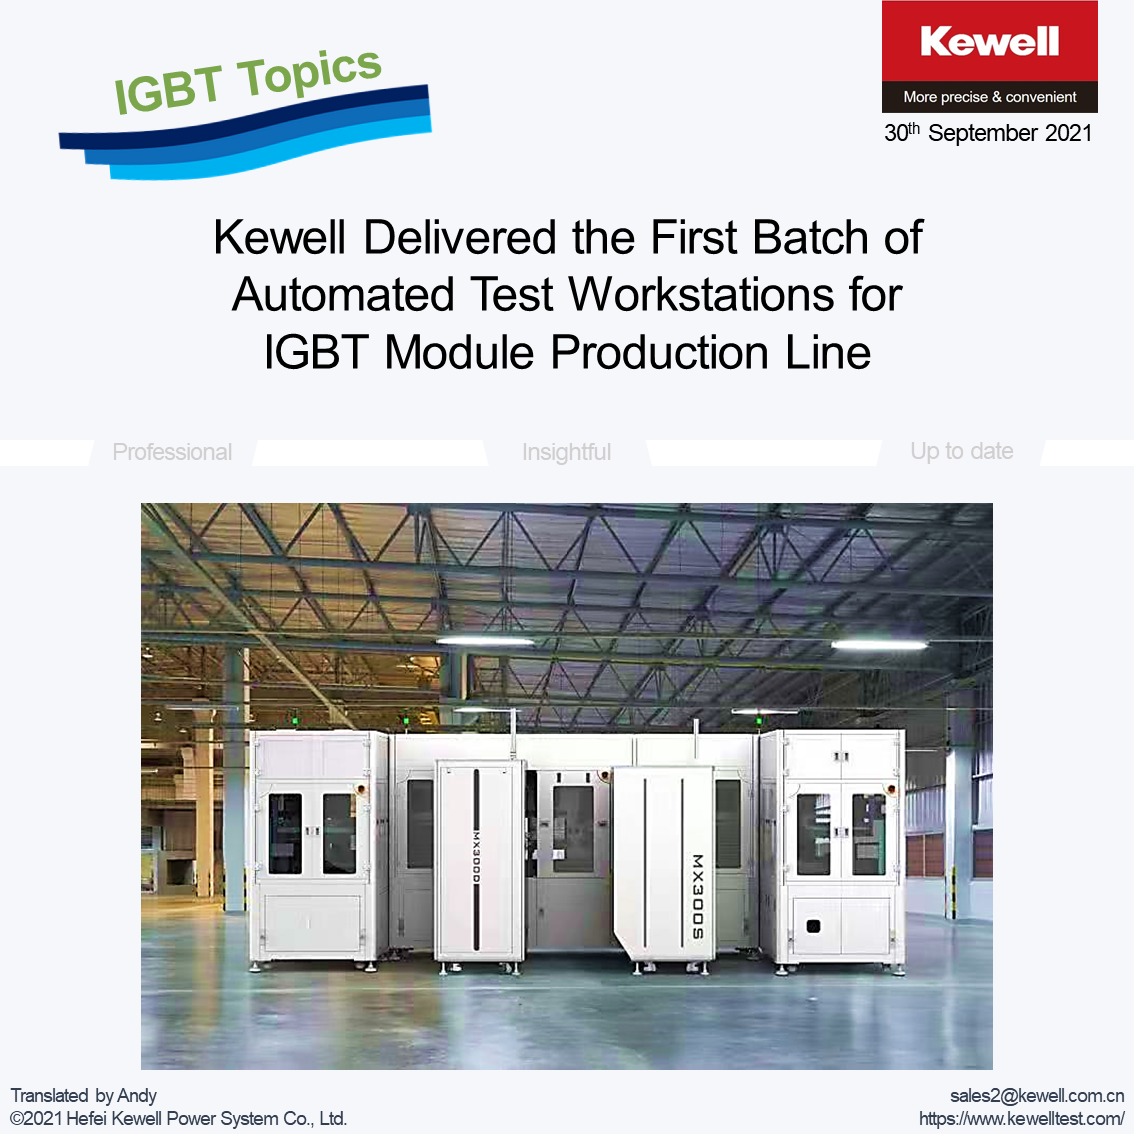 IGBT Topics: Kewell Delivered the First Batch of Automated Test Workstations for IGBT Module Production Line